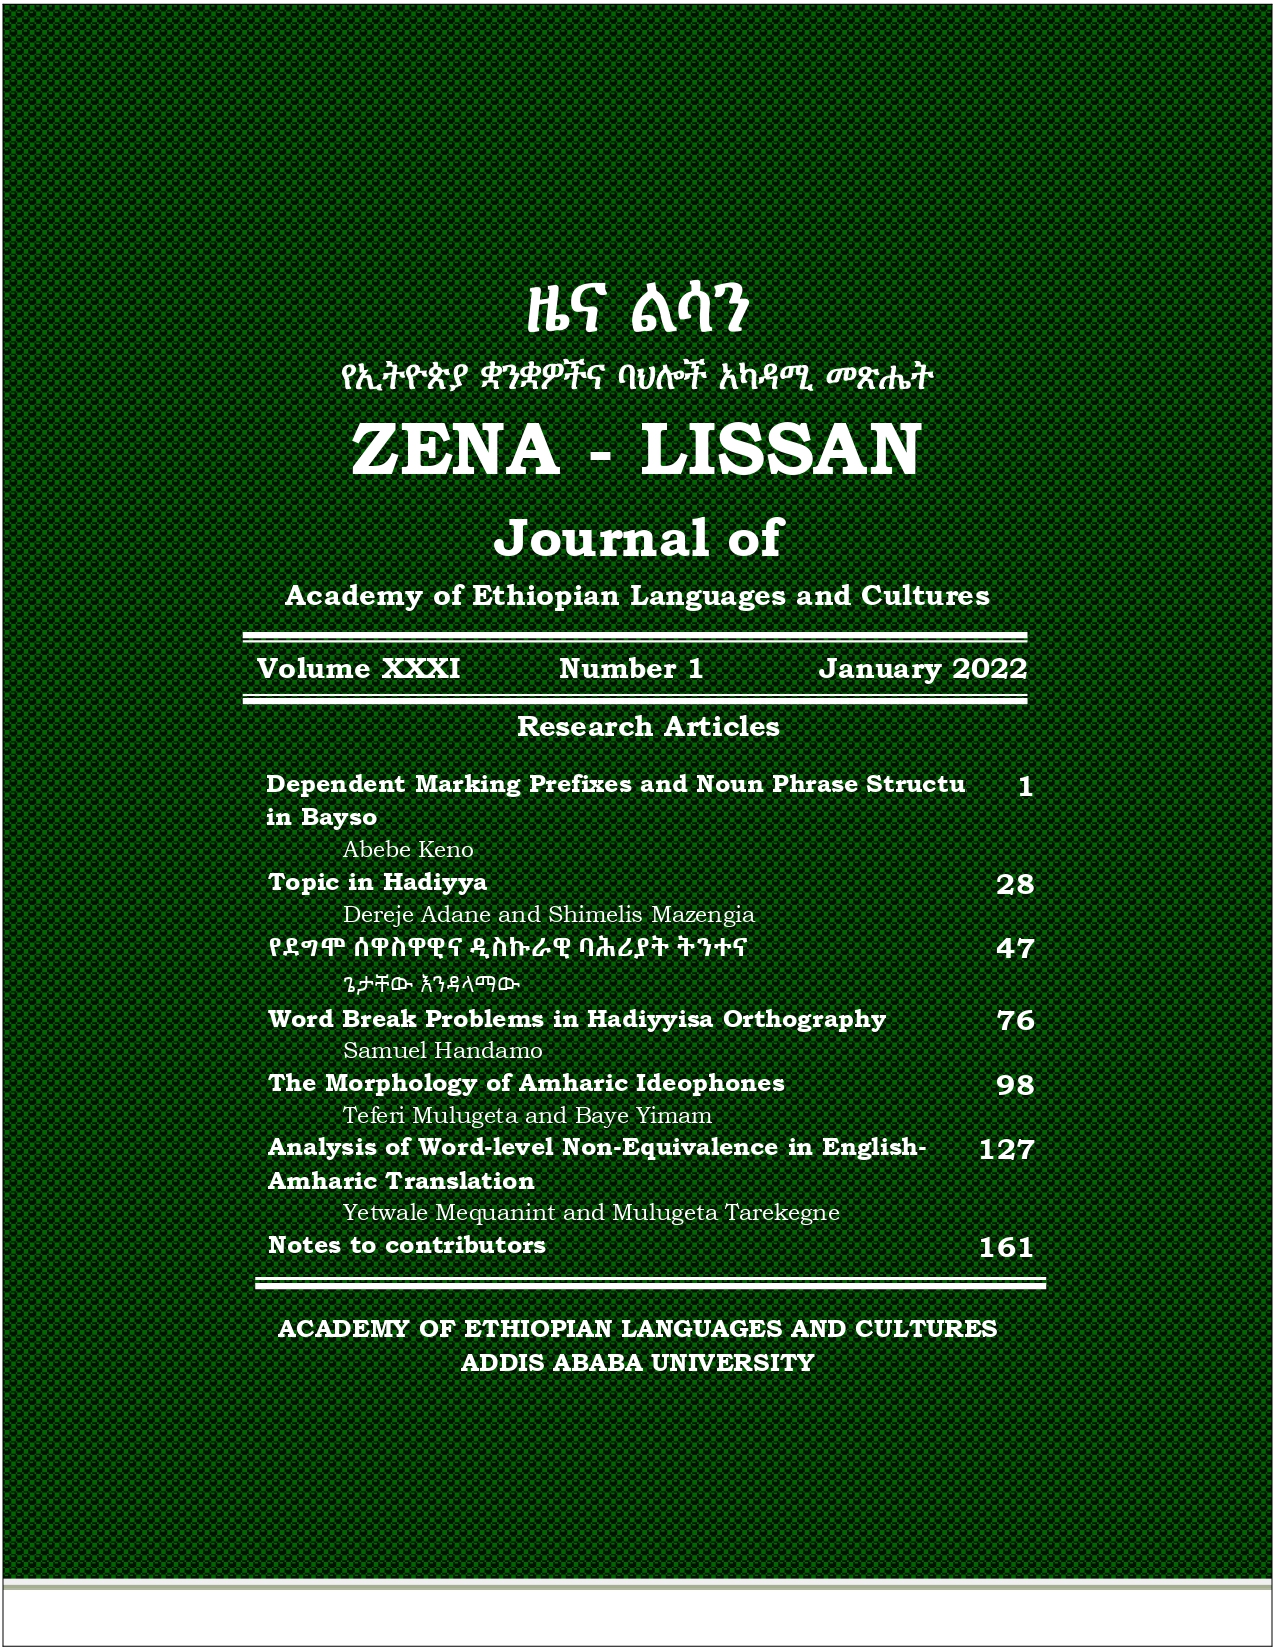 					View Vol. 31 No. 1 (2022): ZENA-LISSAN, JOURNAL OF ACADEMY OF ETHOPIAN LANGUAGES AND CULTURES
				